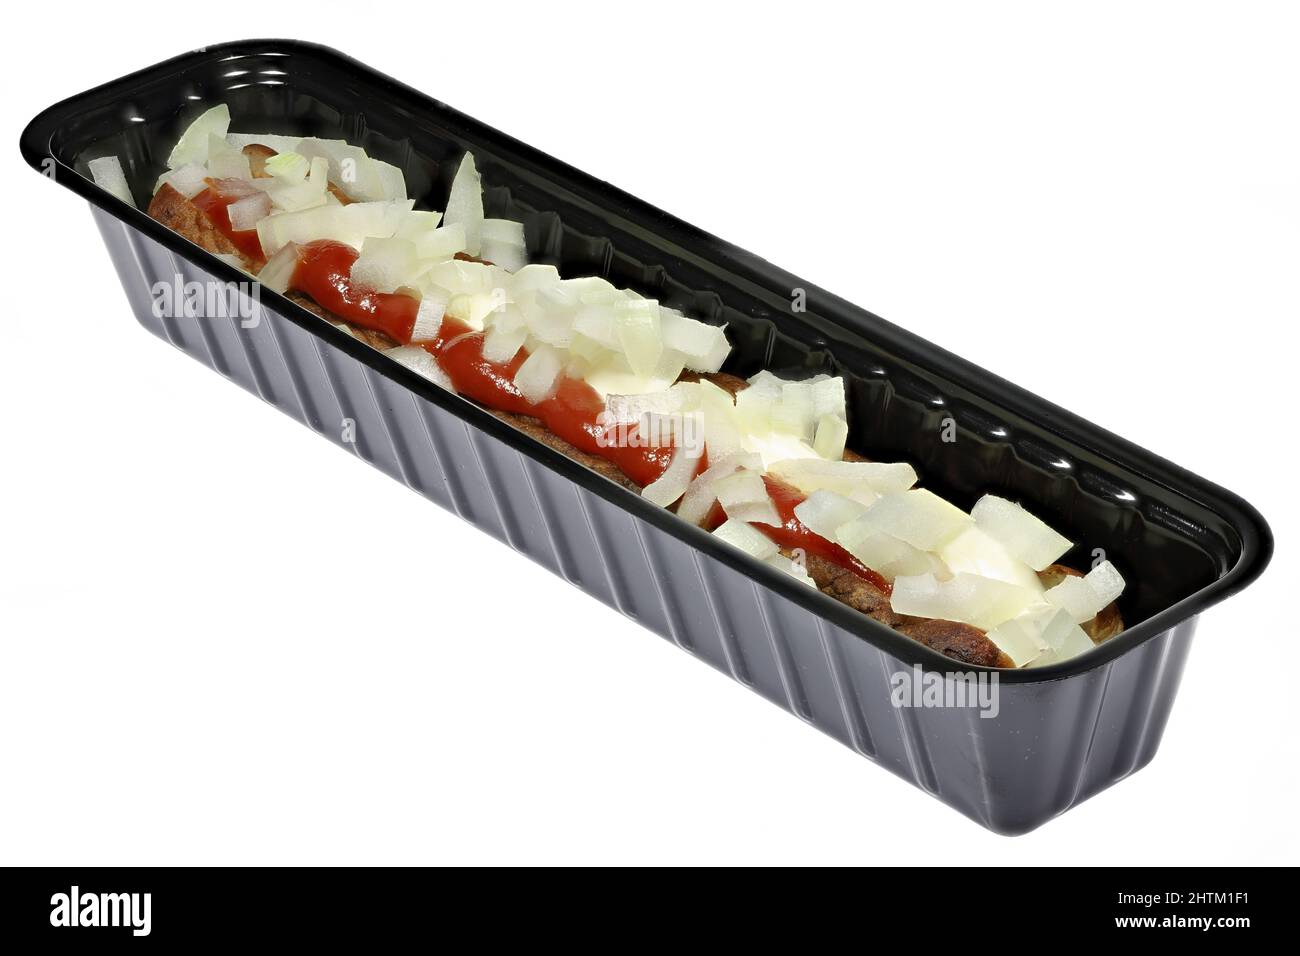 Dutch frikandel speciaal in a black plastic container isolated on white background Stock Photo